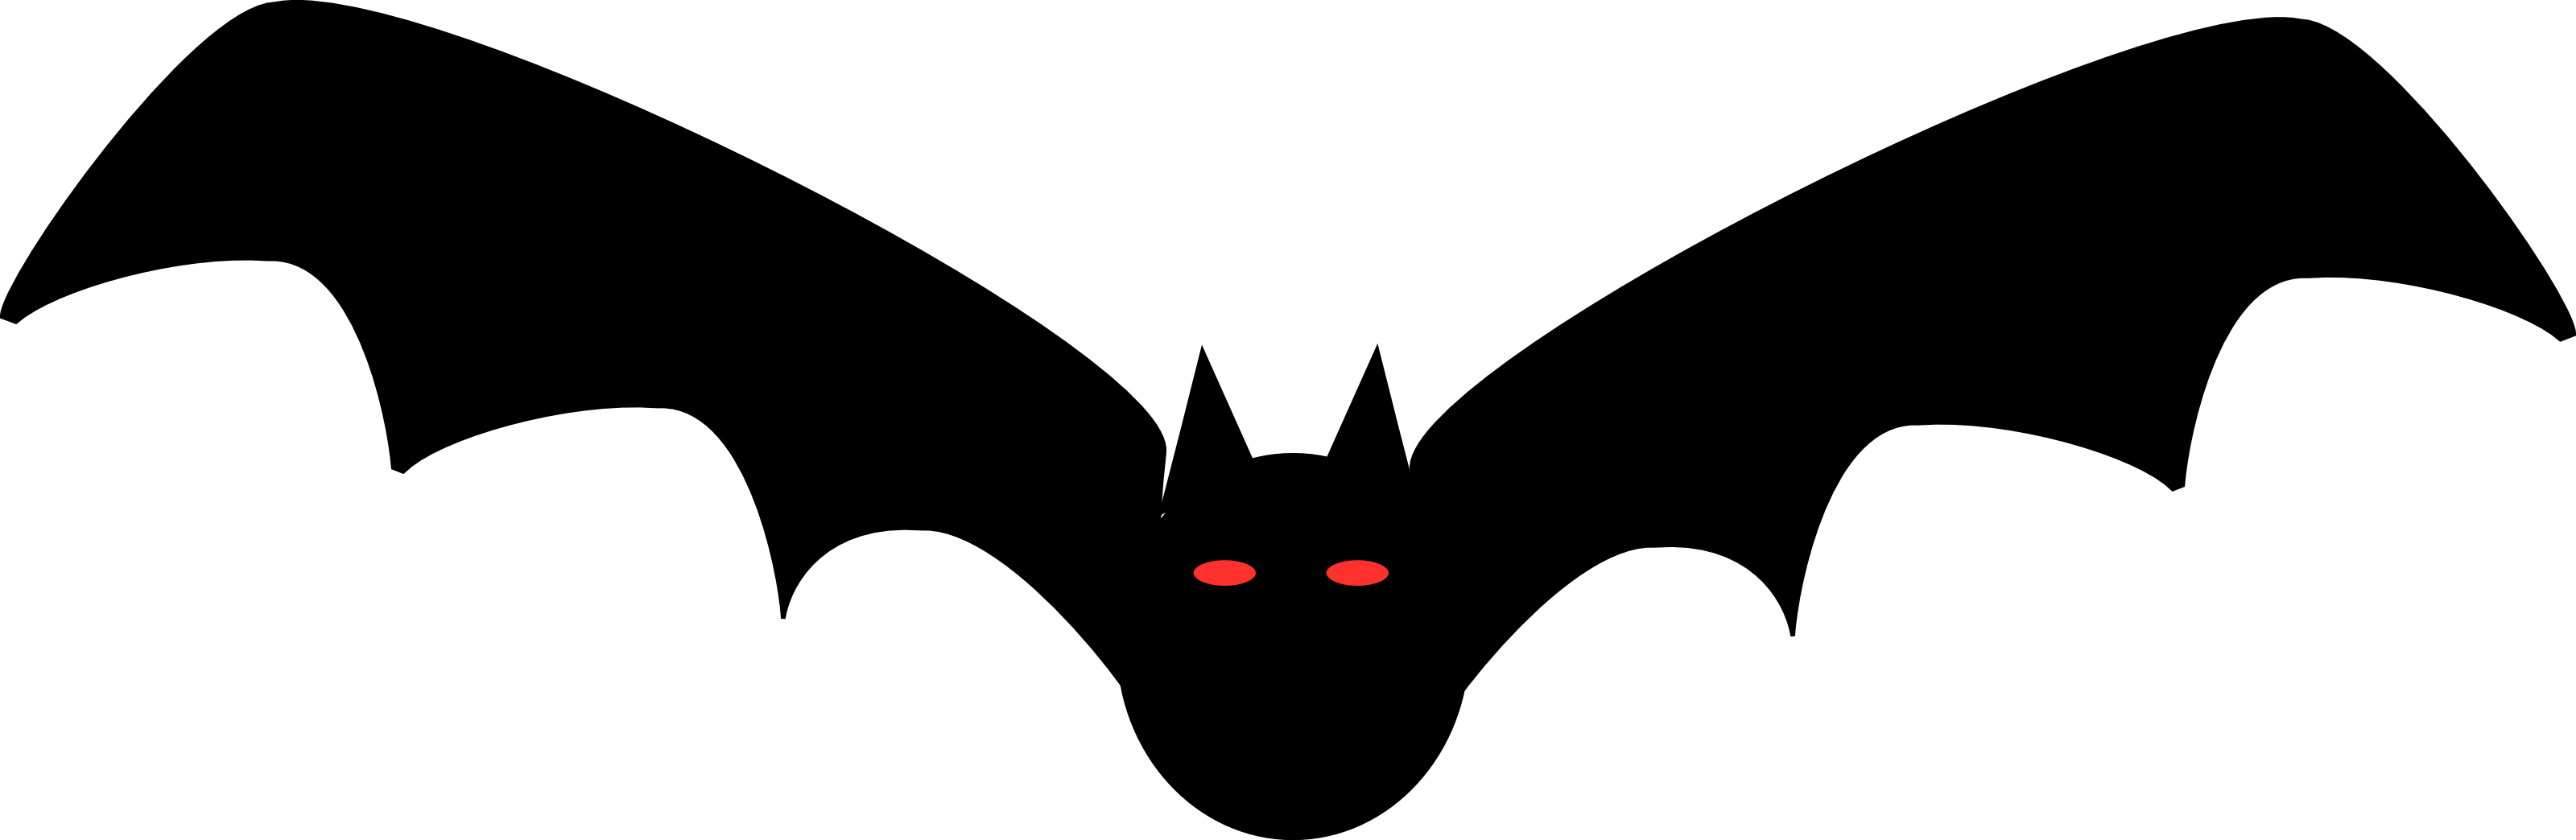 14 Halloween Cartoon Bat Free Cliparts That You Can Download To You